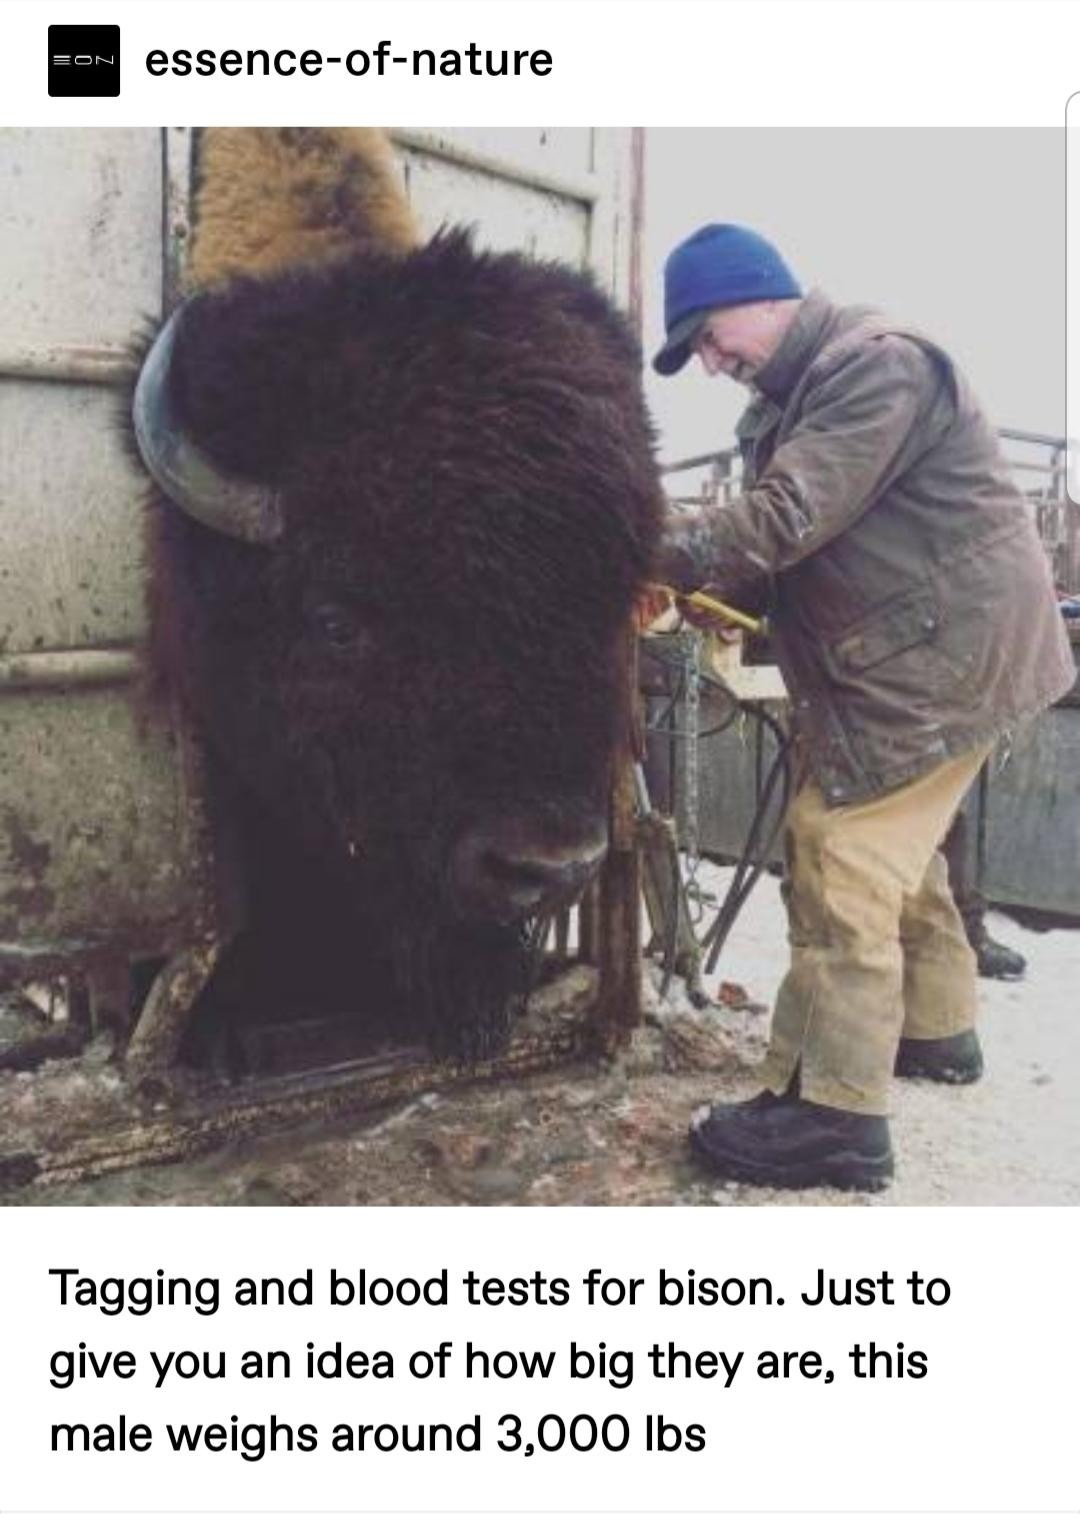 cool randoms  - absolute unit - On essenceofnature Tagging and blood tests for bison. Just to give you an idea of how big they are, this male weighs around 3,000 lbs